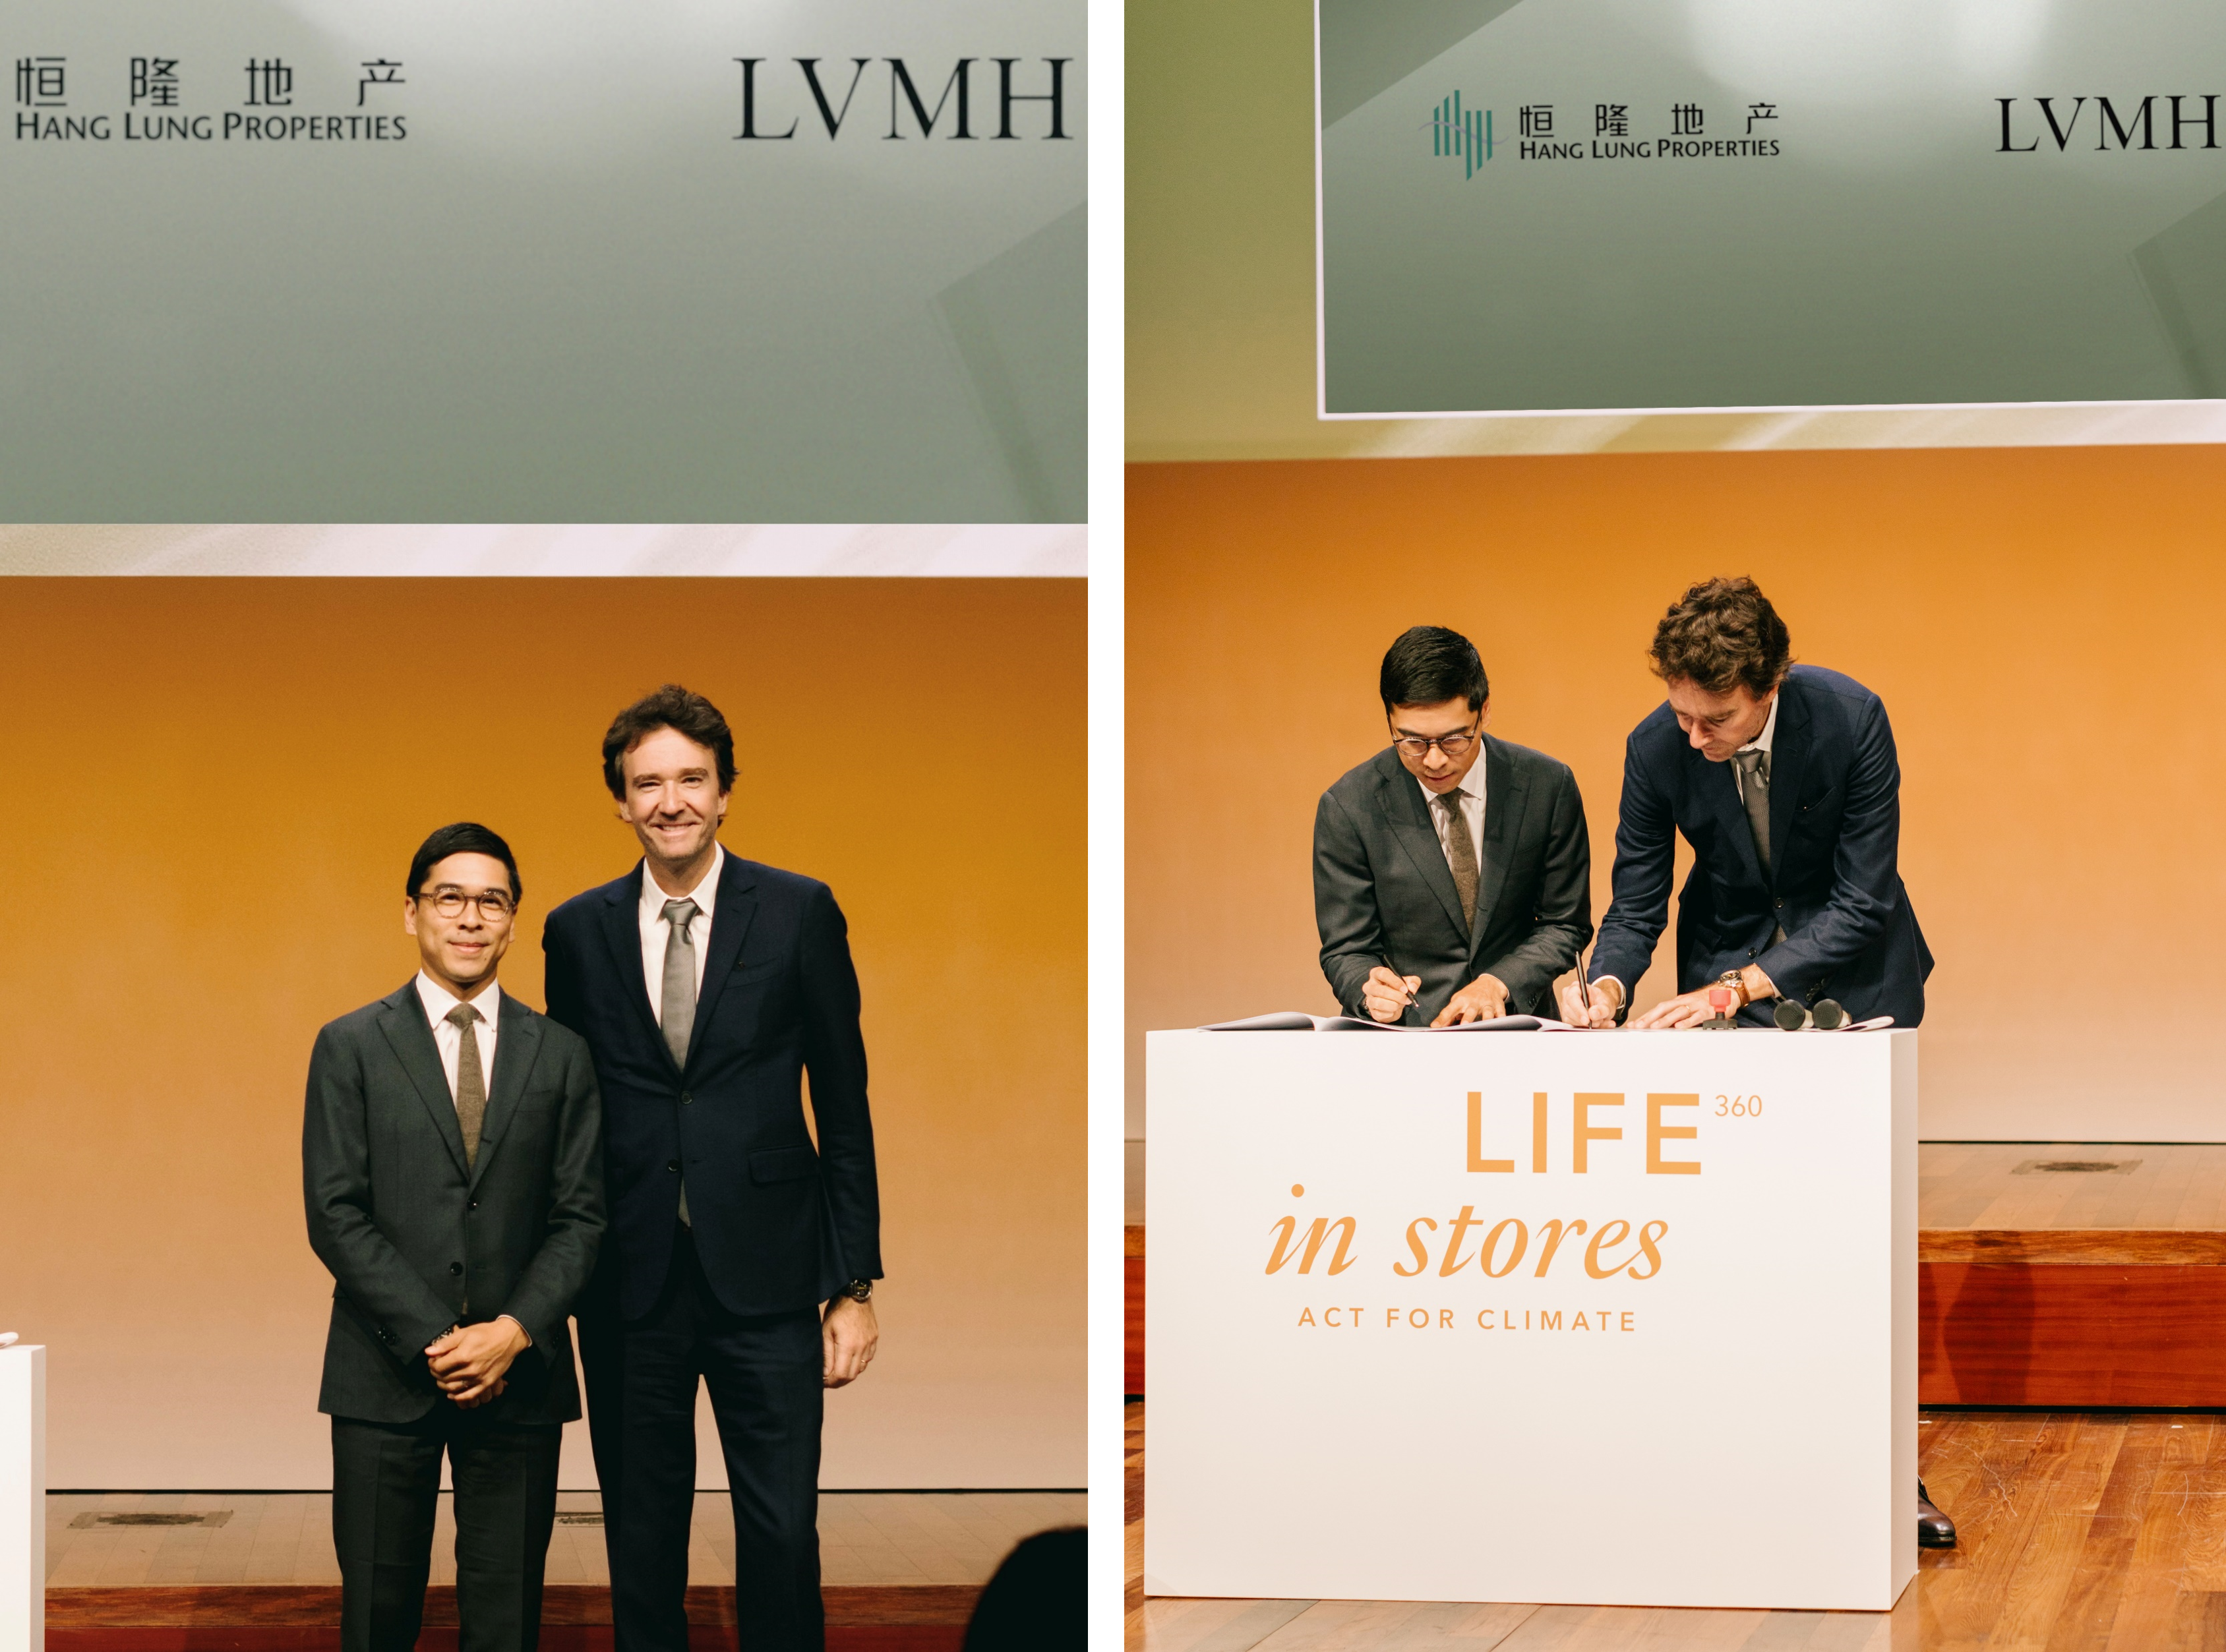 Lvmh Moet Hennessy Louis Vuitton Investor Relations